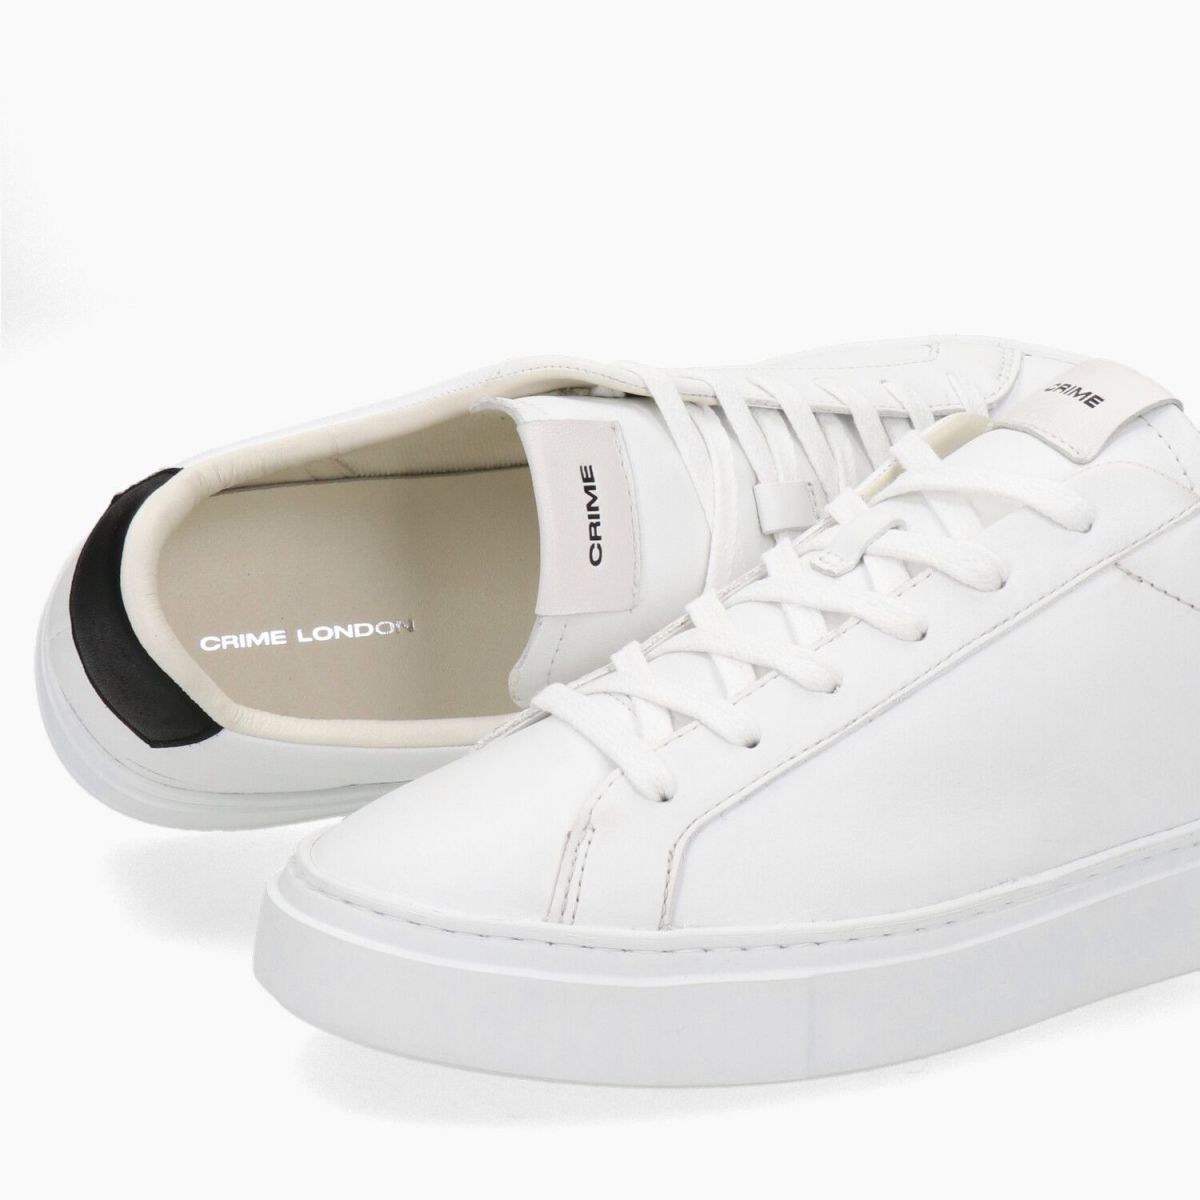 Crime London Sneakers Weightless Low Top White 13470PP4-BIANCO-022